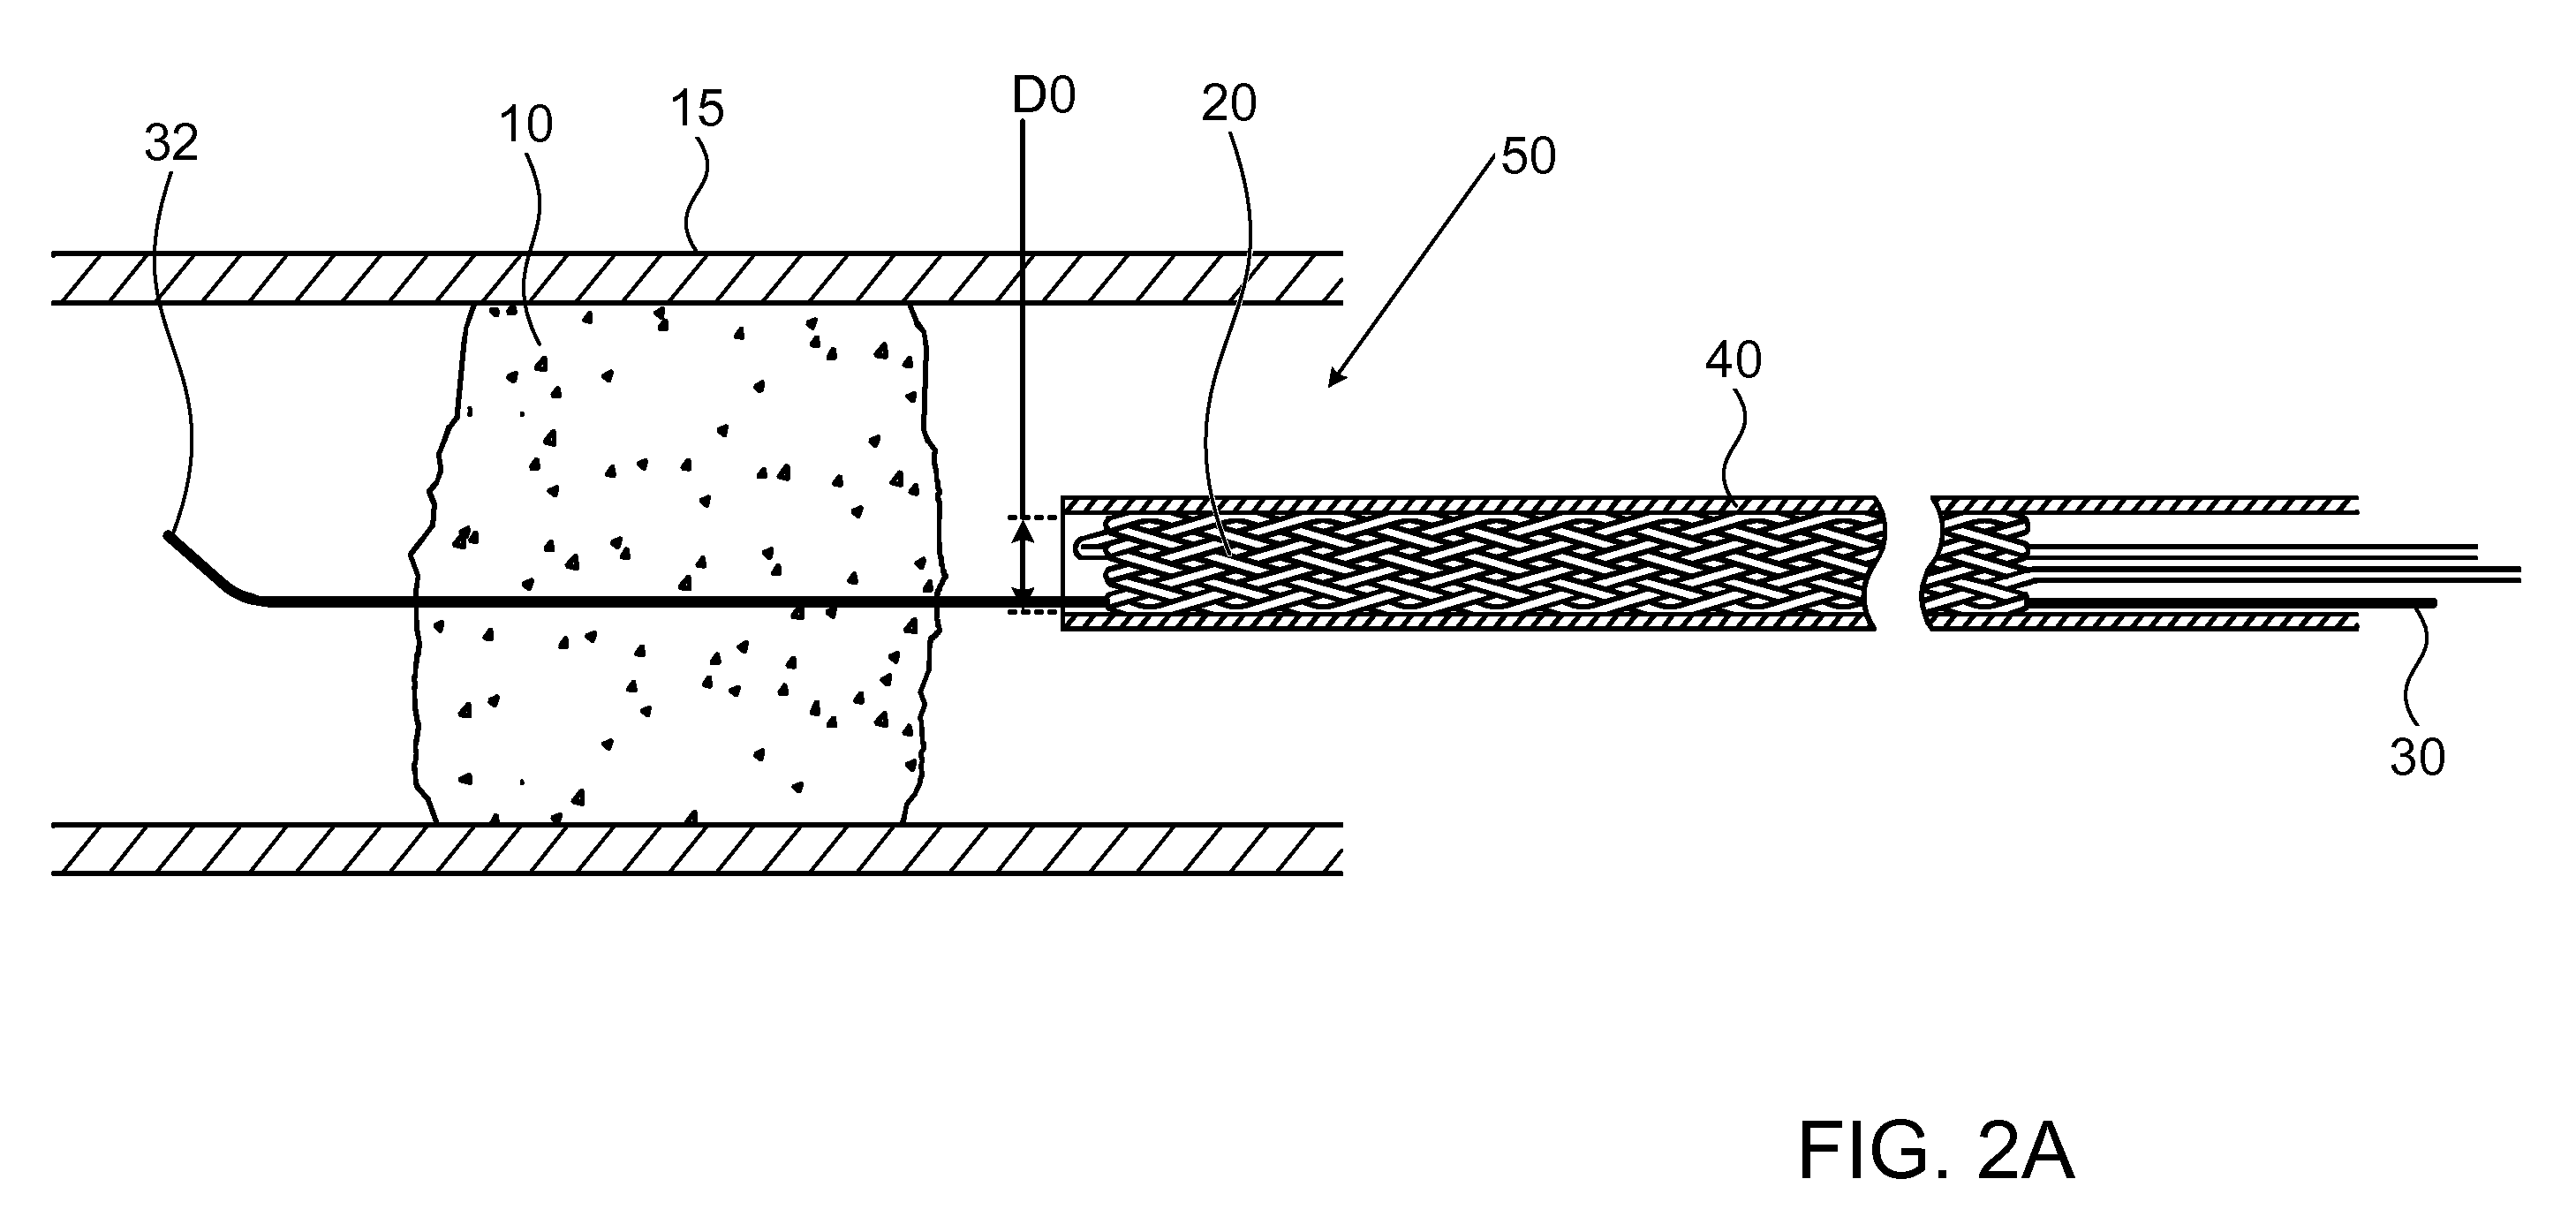 Method and apparatus for allowing blood flow through an occluded vessel